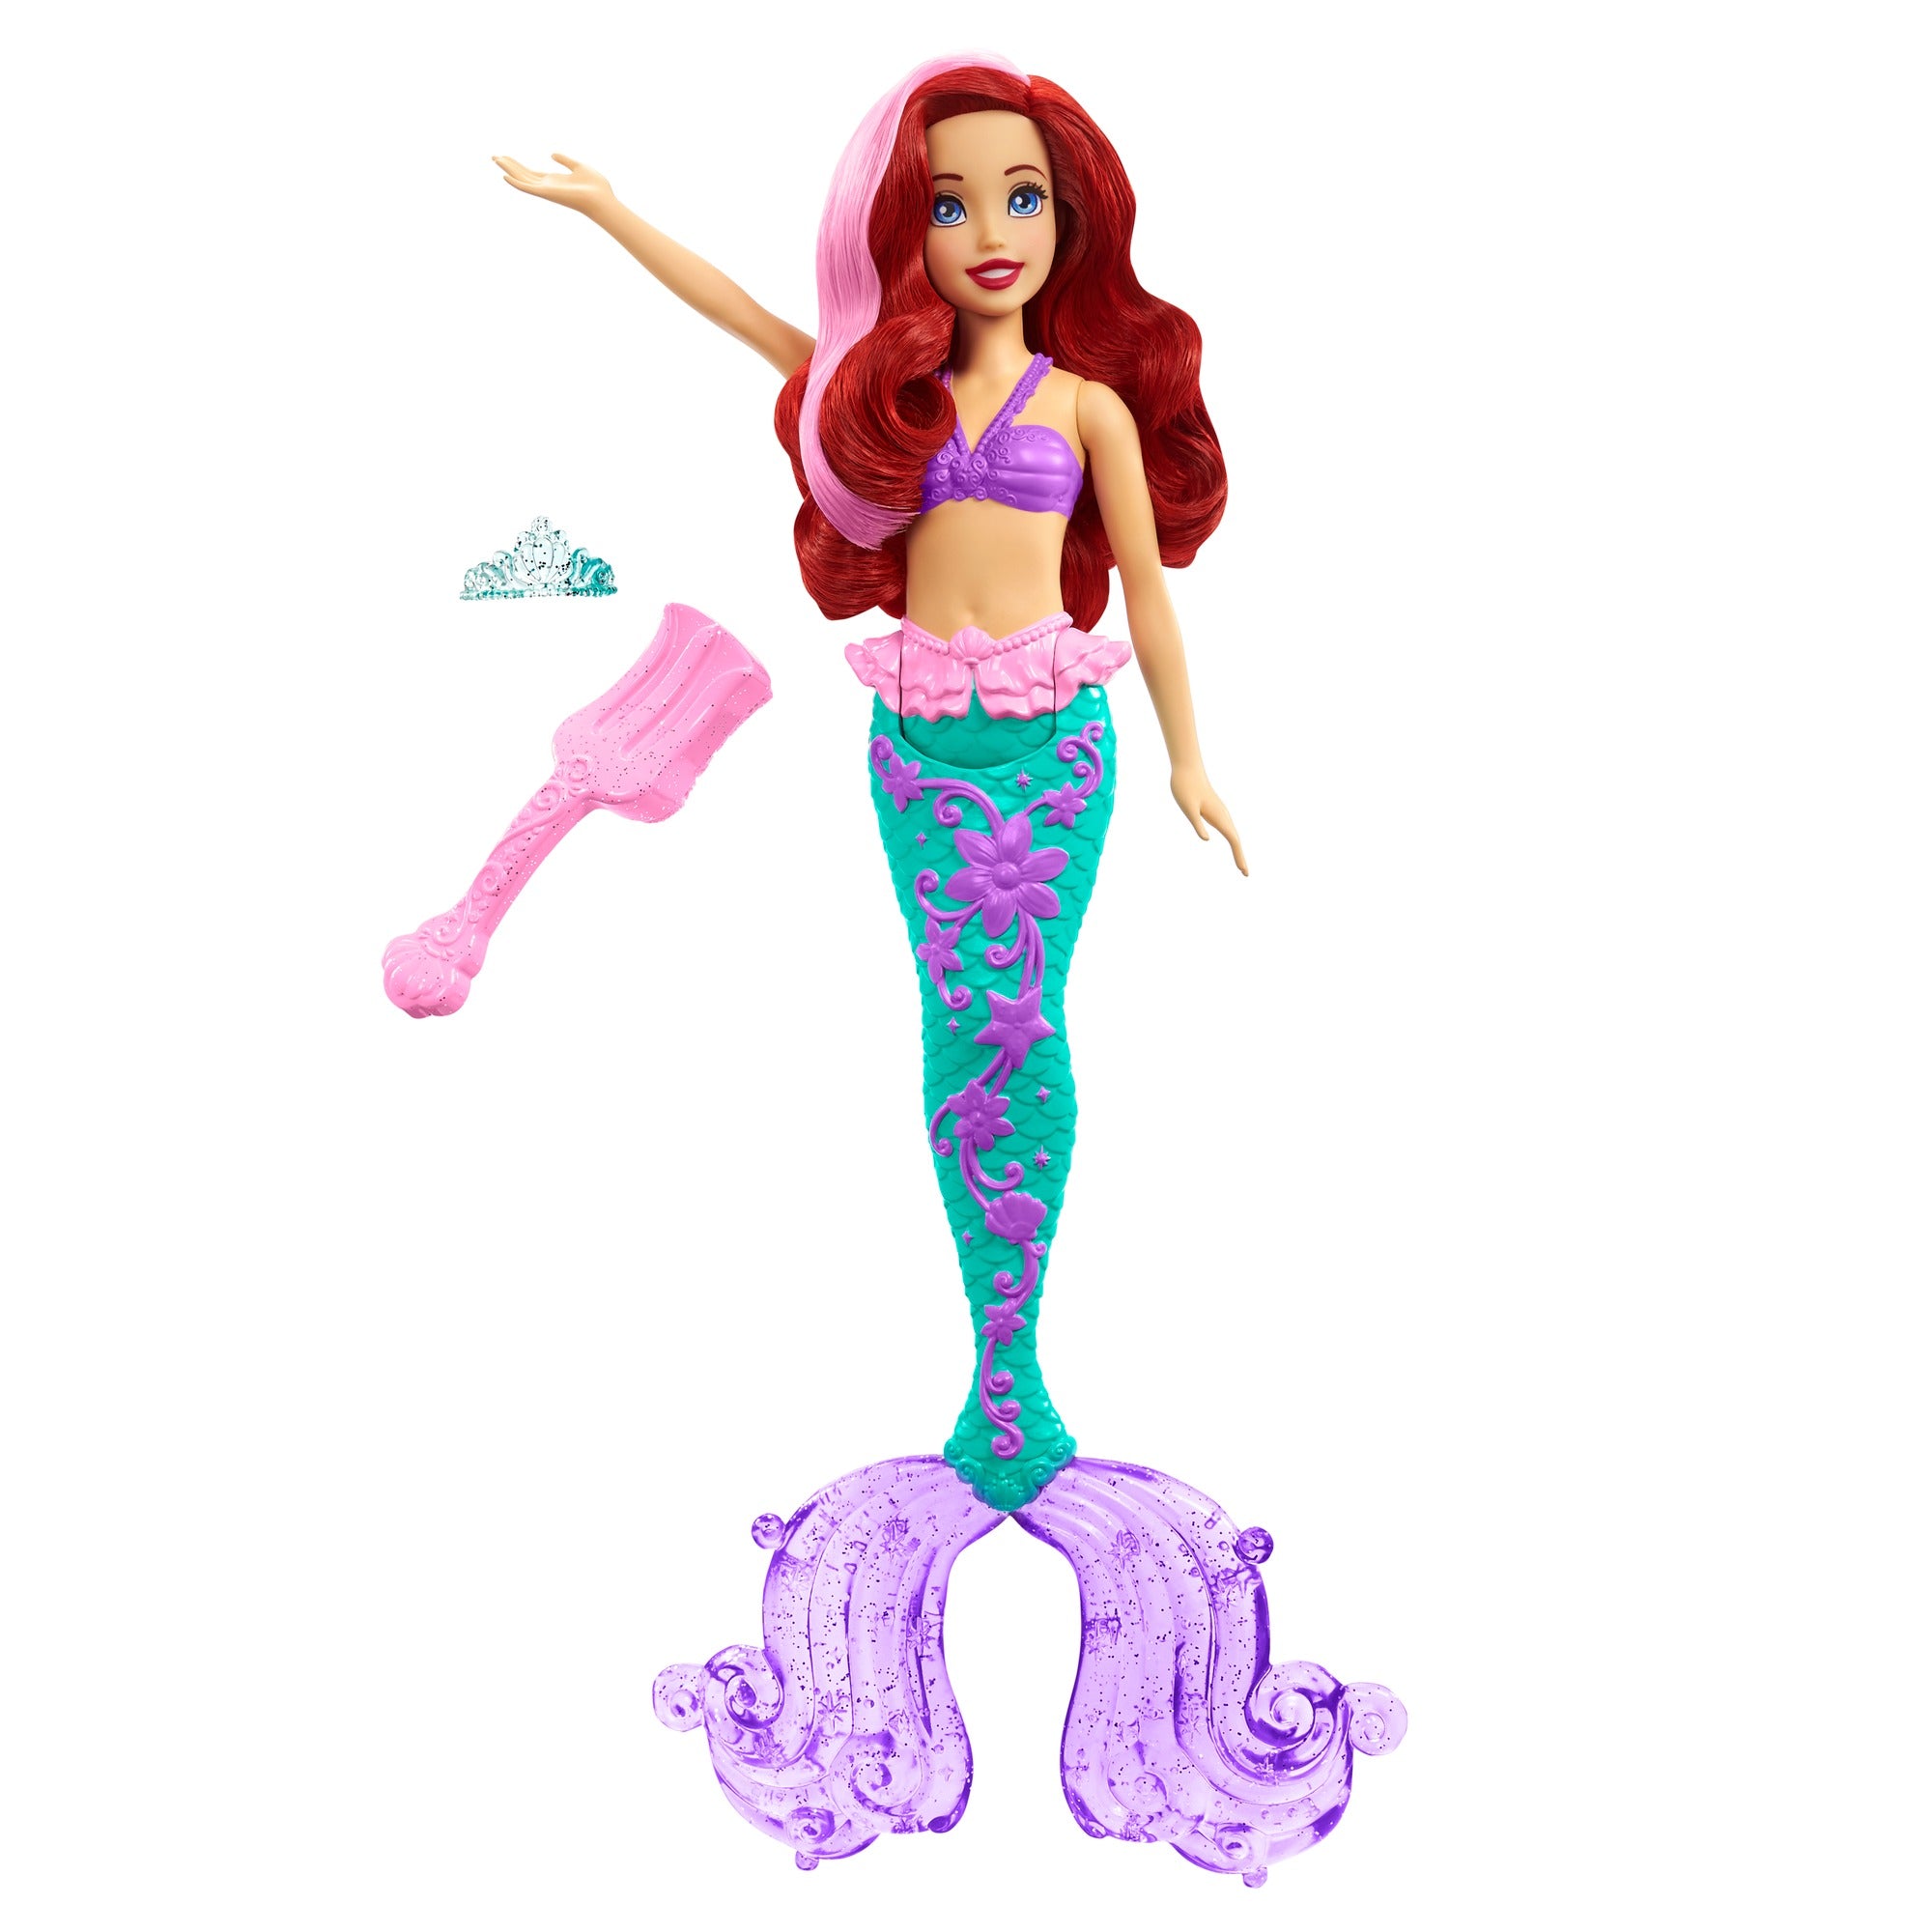 Disney Princess Ariel Mermaid Doll with Color-Change Hair and Tail, Color Splash Water Toy Inspired by the Disney Movie for Kids Ages 3+